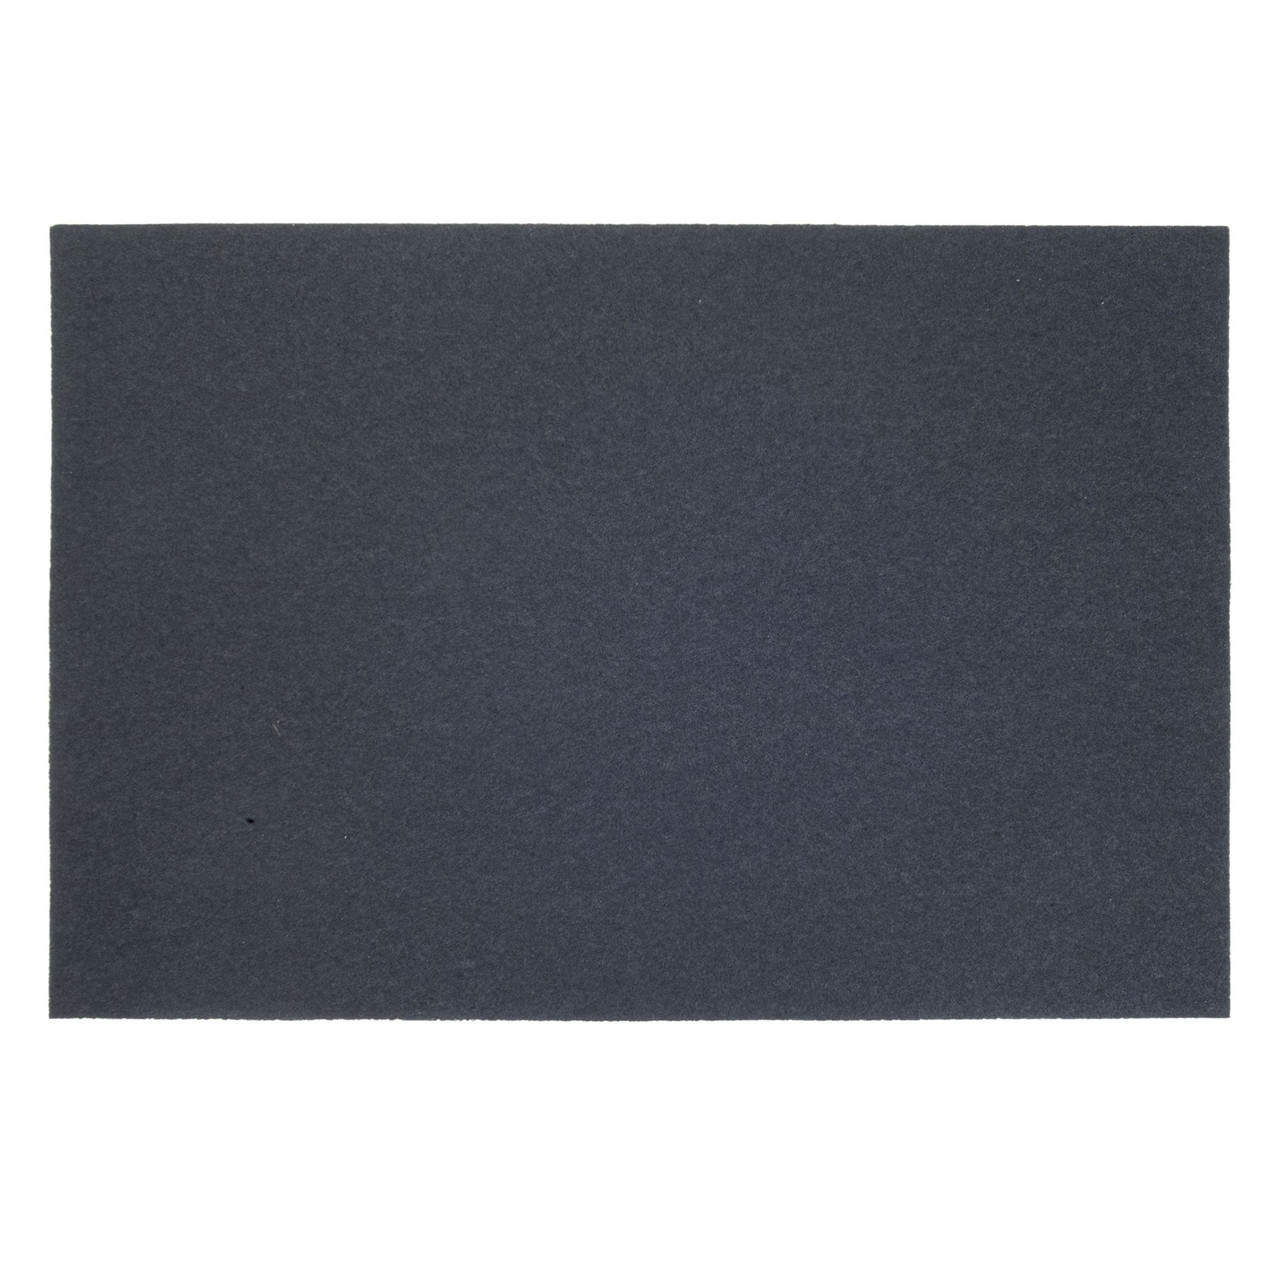 Norton Silicon Carbide Double Sided 12" x 18" Sheet - 120 grit (10/Box)